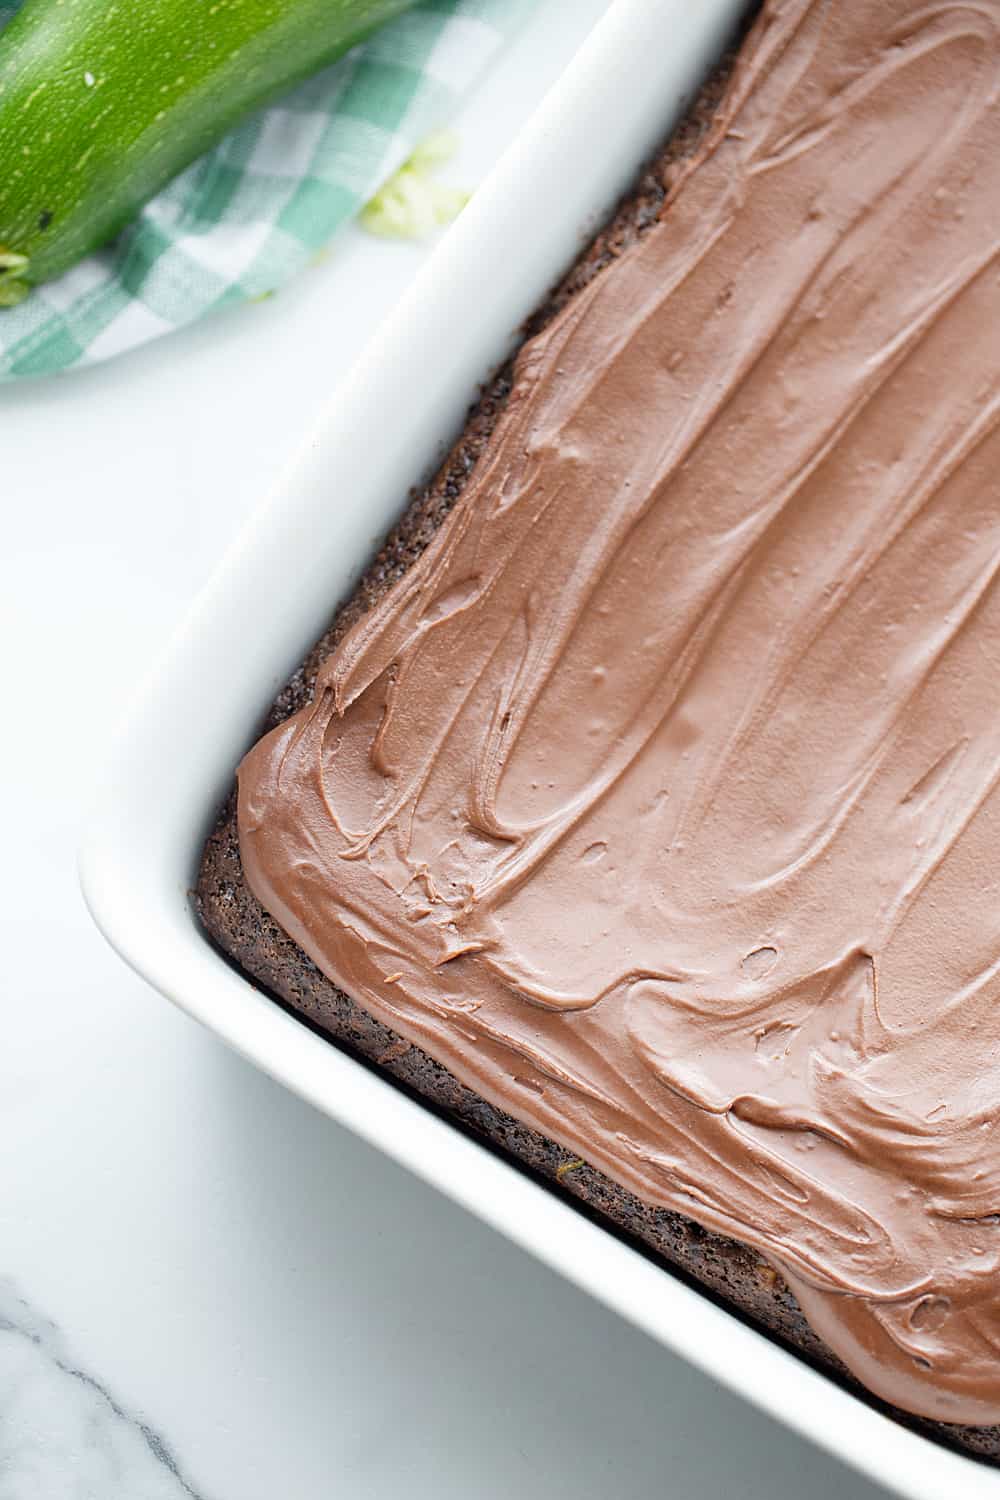 Frosted Zucchini Brownies - Frosted zucchini brownies feature a decadent chocolate flavor and rich, creamy frosting. And guess what? You can't taste zucchini in this brownie recipe! #halfscratched #brownies #brownie #recipe #baking #chocolate #zucchini #dessert #sweets